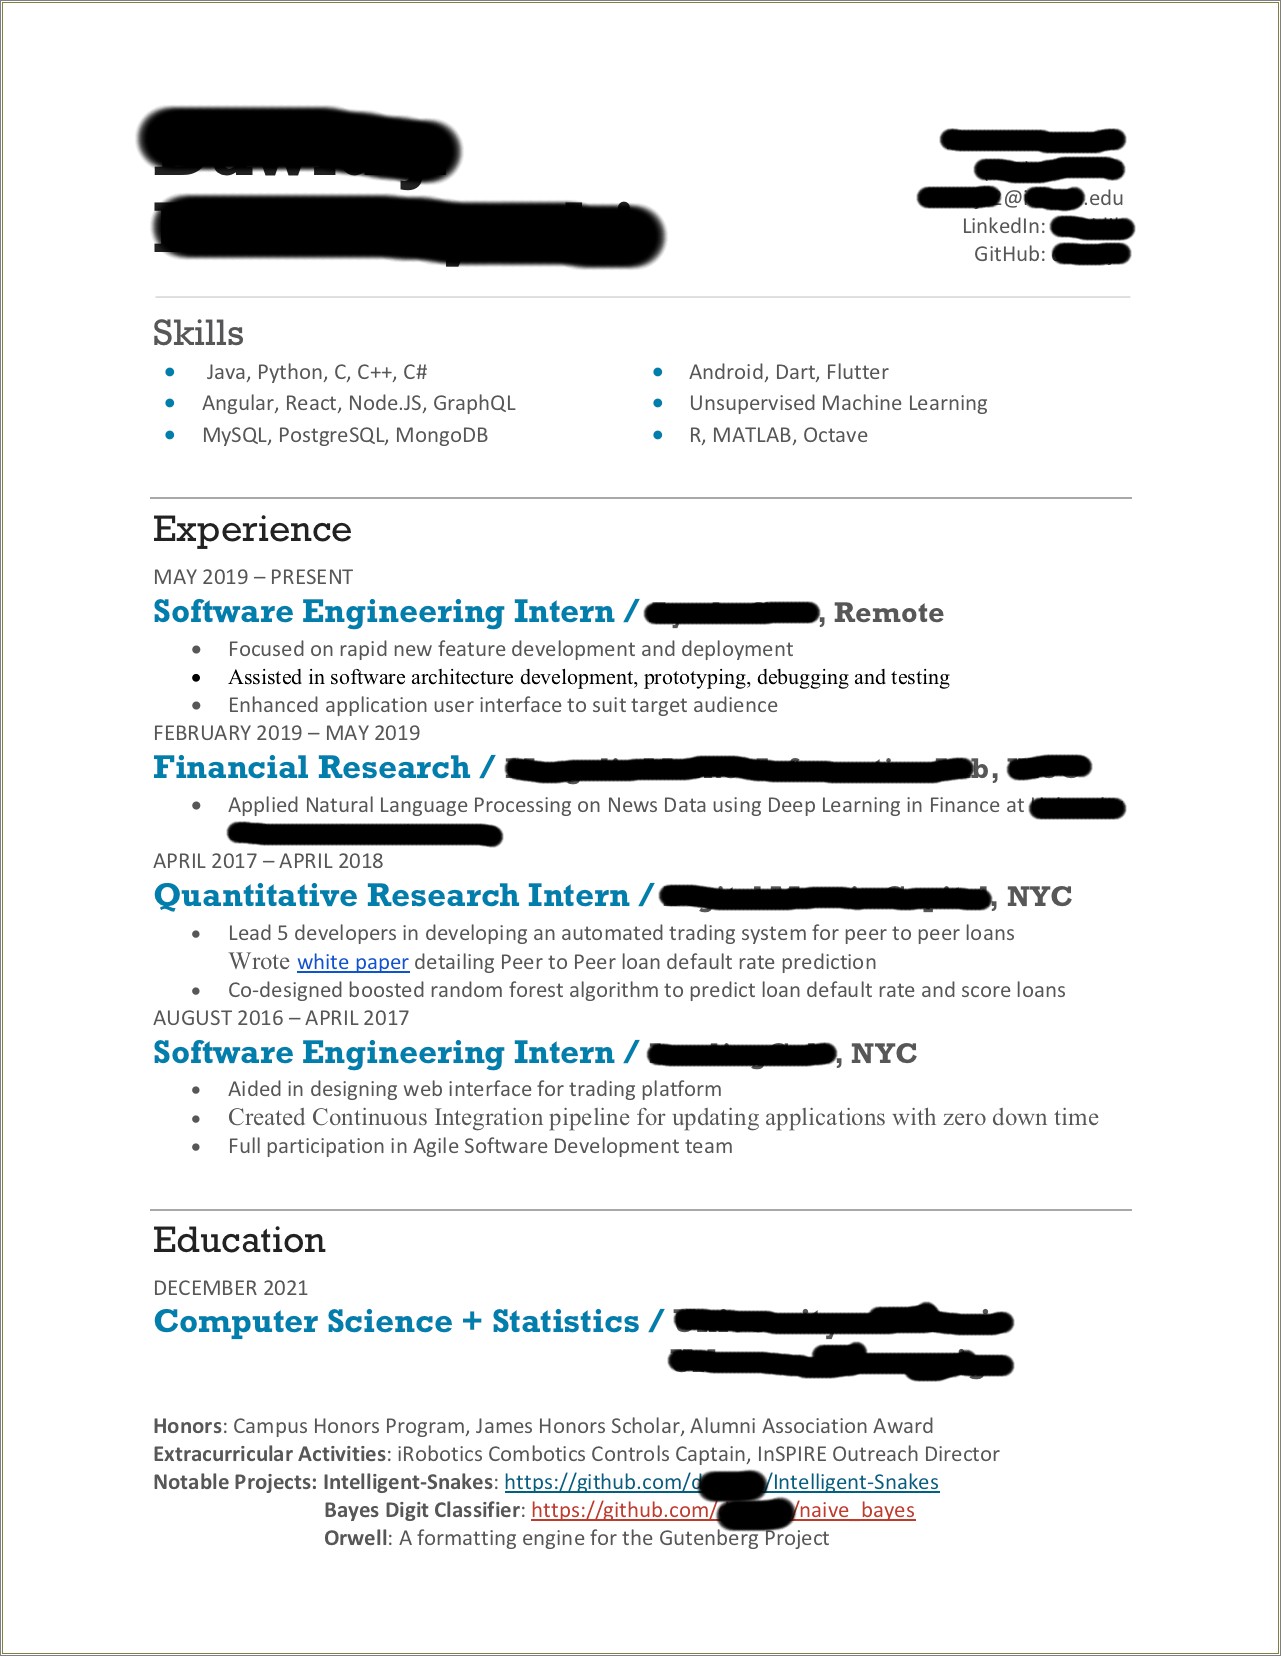 Is Ti Good To Put Links In Resume